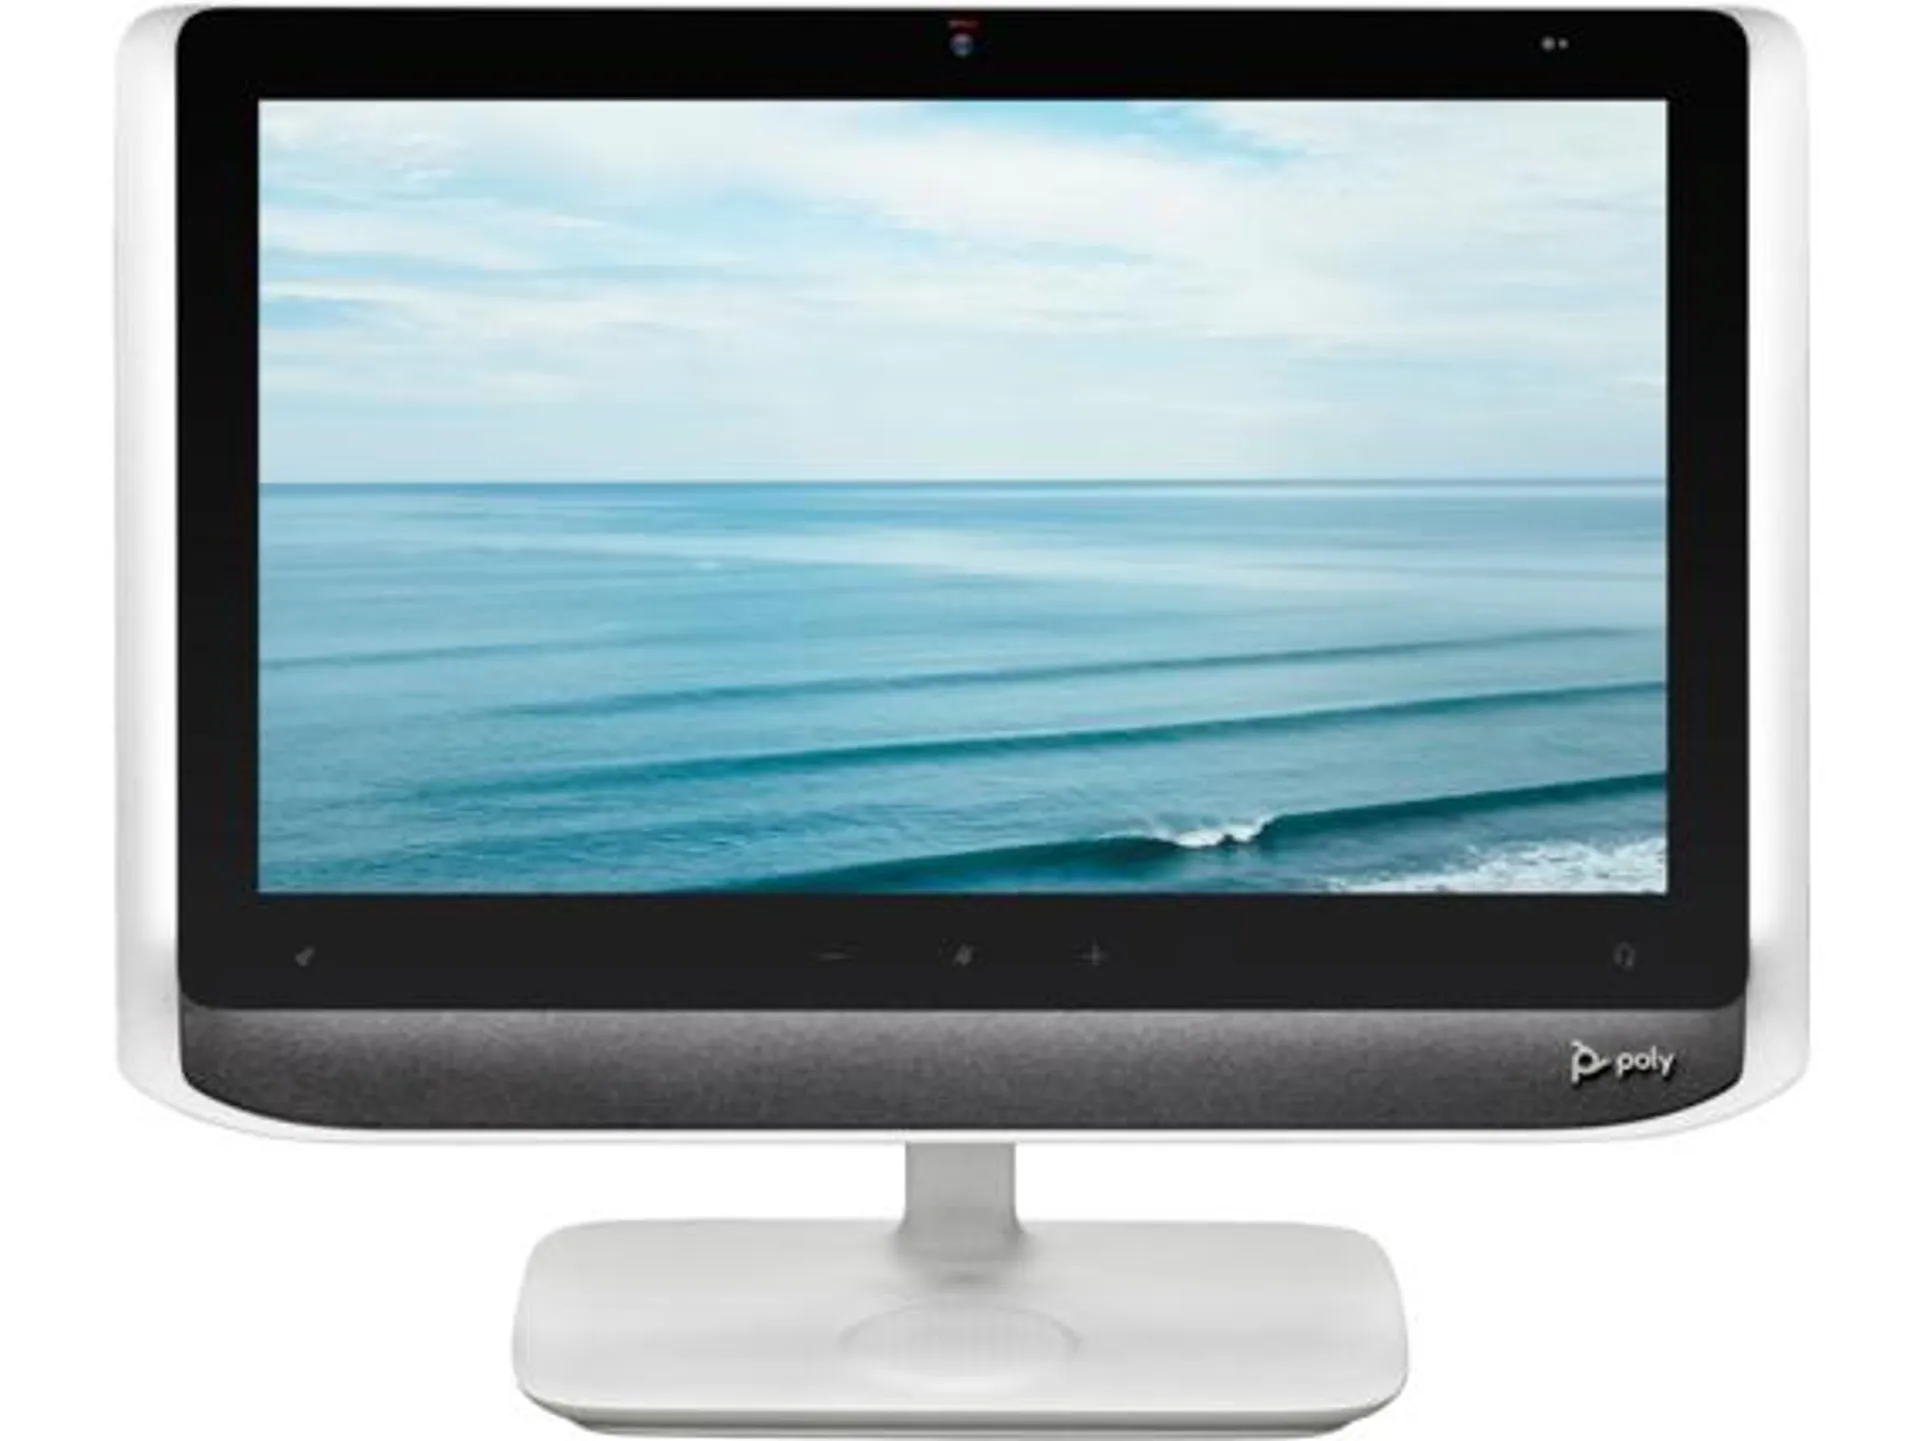 Poly Studio P21 21.5-inch Personal Meeting Display with integrated Stereo Speaker, 1080p Camera. Mic, Touchbar + Lighting